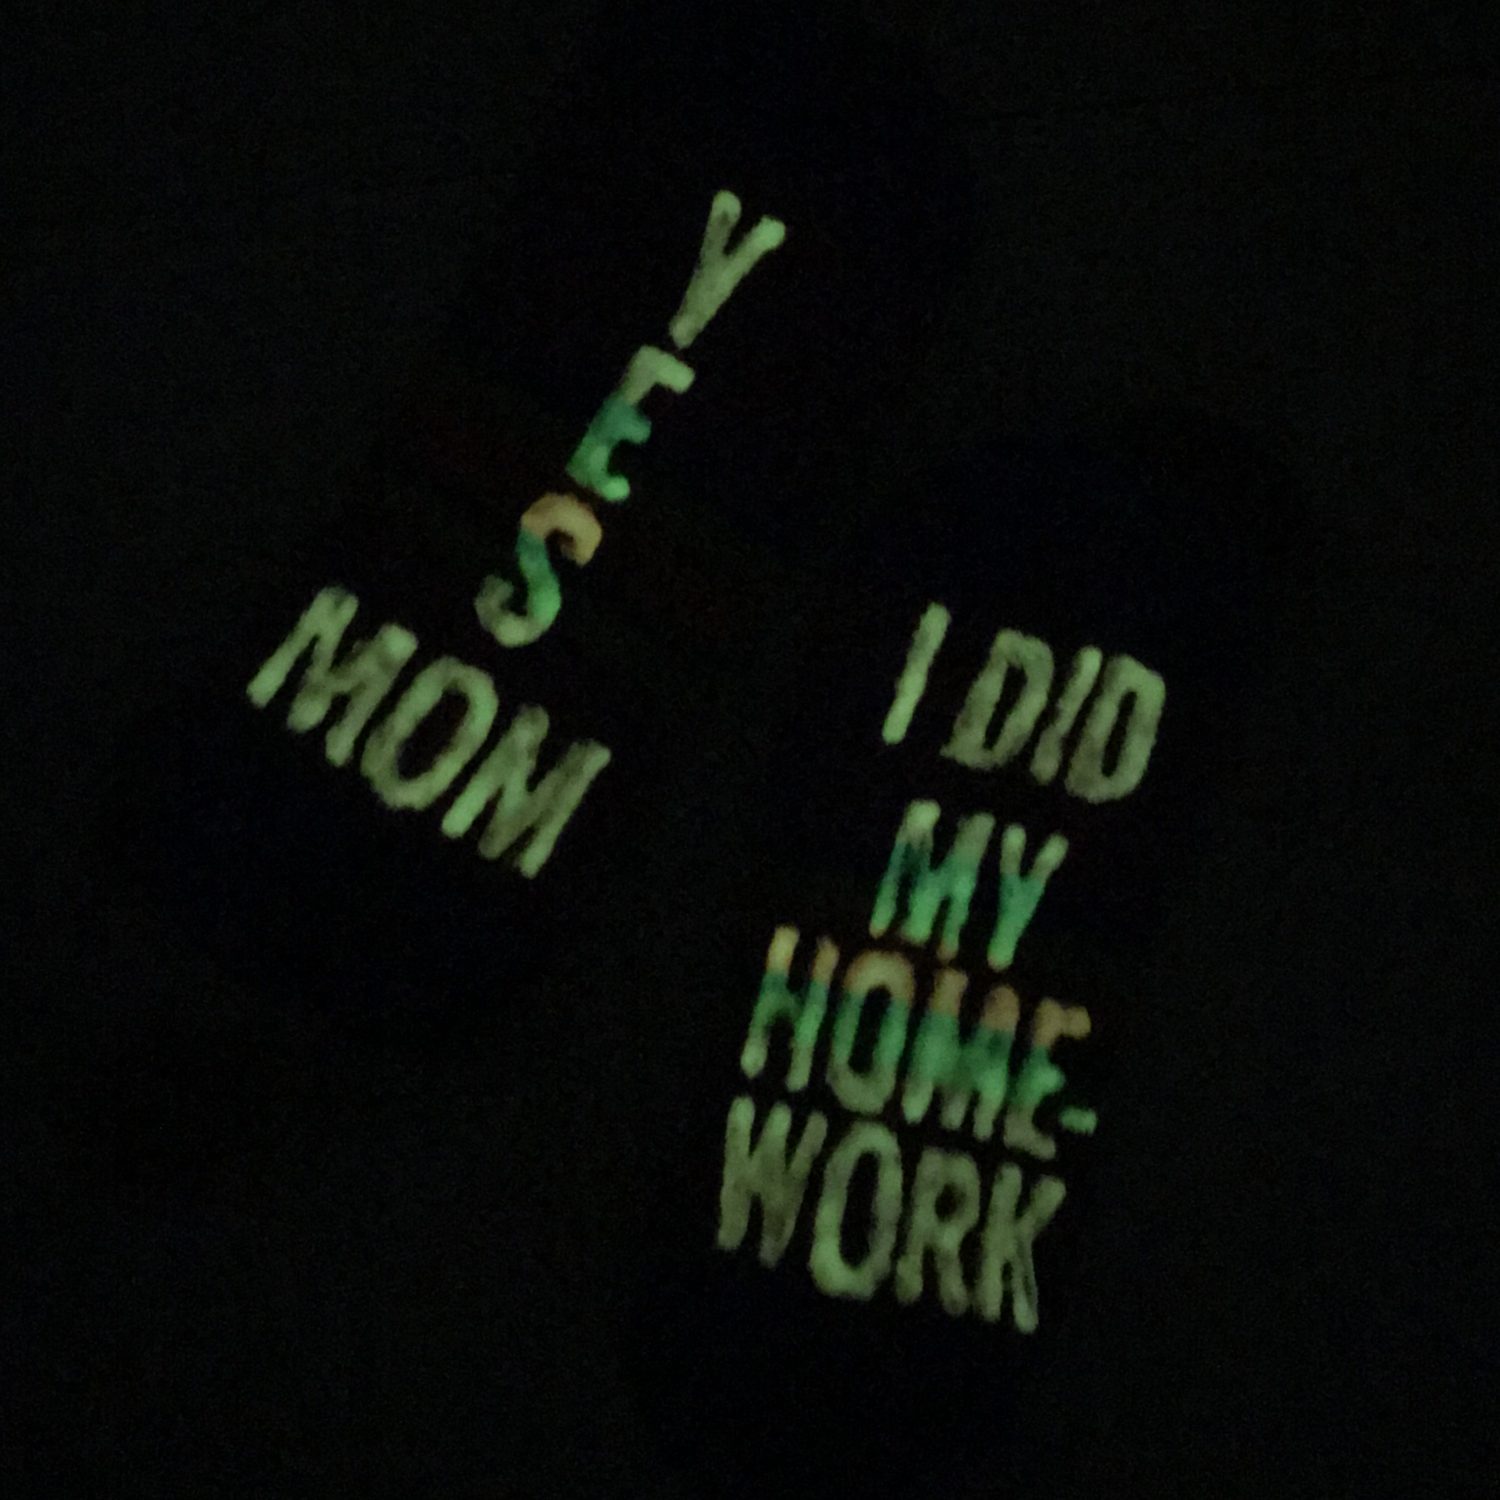 glow in the dark socks made with the freezer paper stencil method.